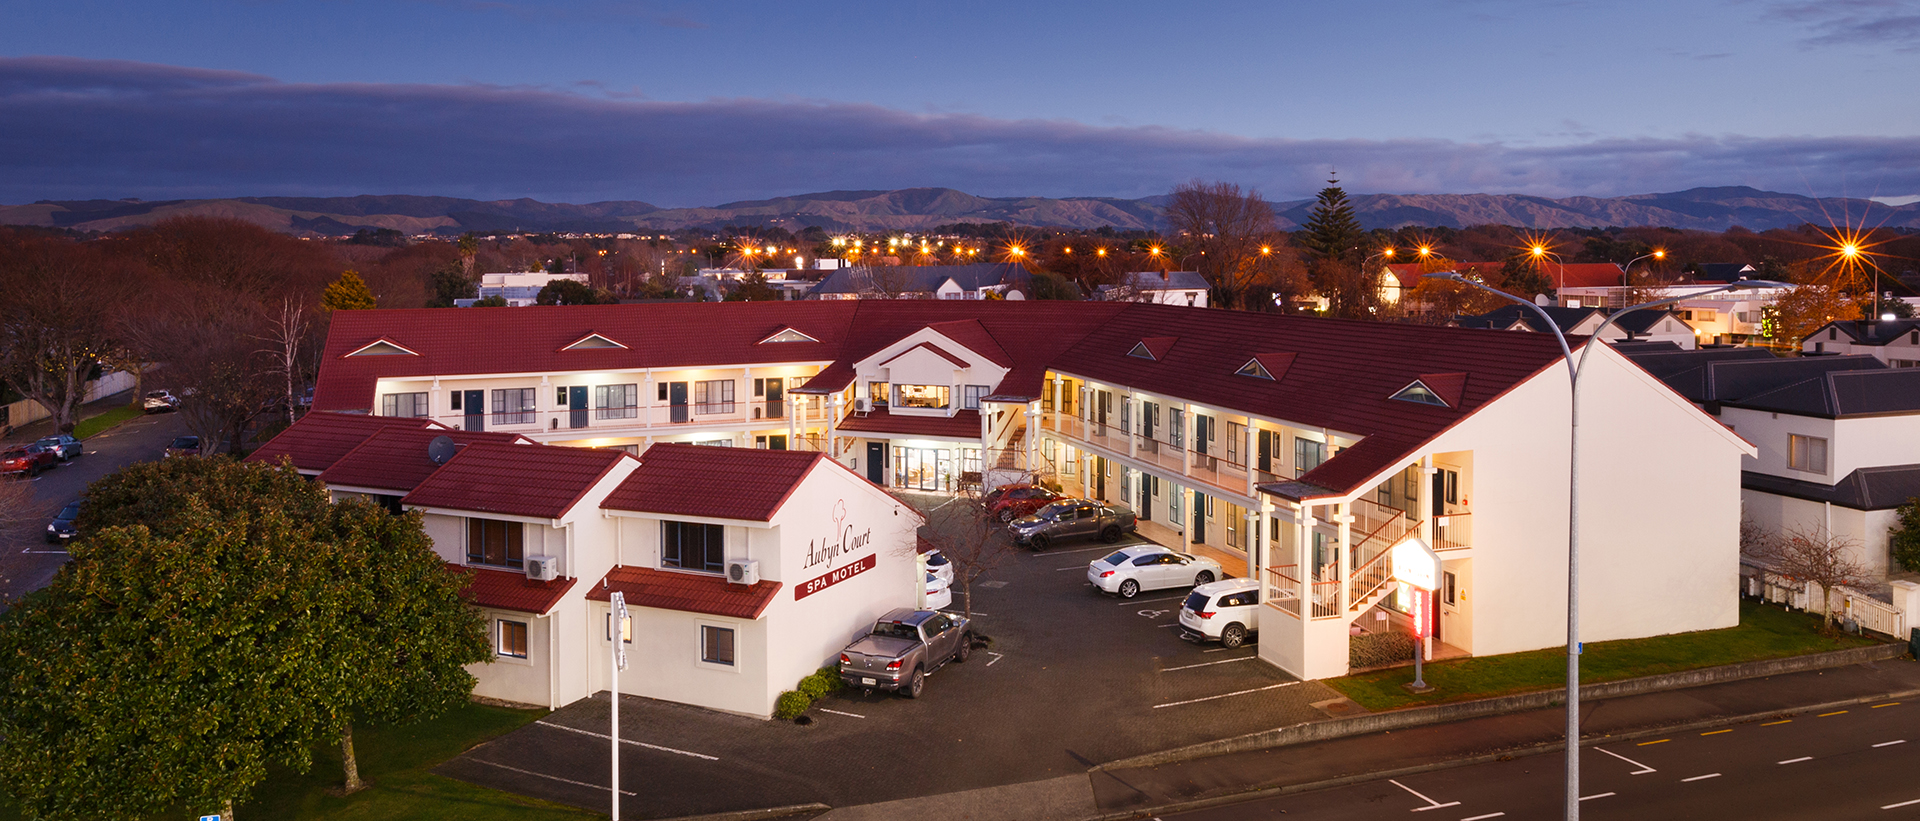 Guest Reviews for Aubyn Court Spa Motel